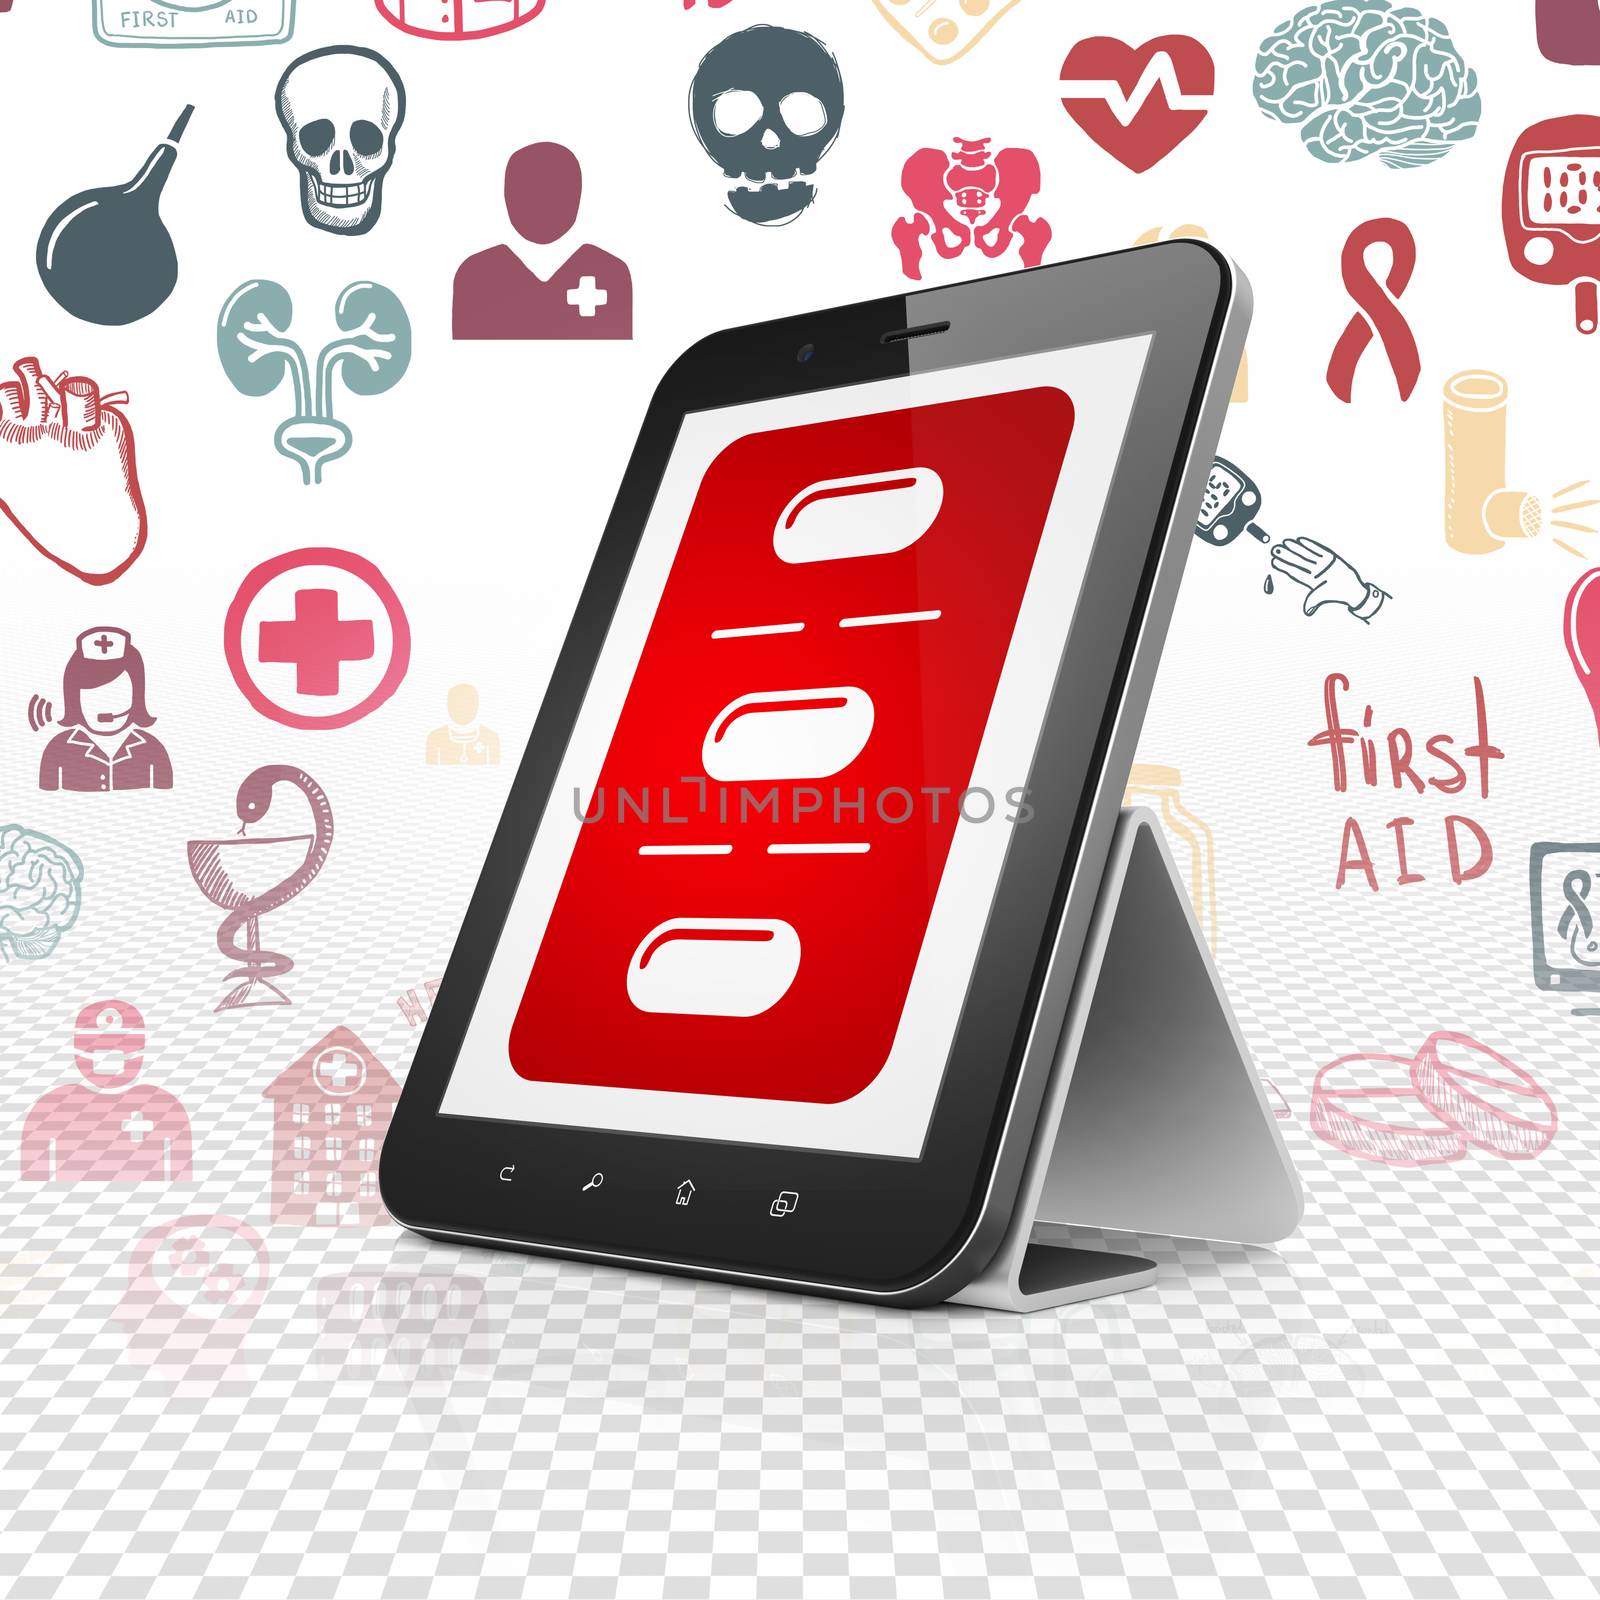 Medicine concept: Tablet Computer with  red Pills Blister icon on display,  Hand Drawn Medicine Icons background, 3D rendering